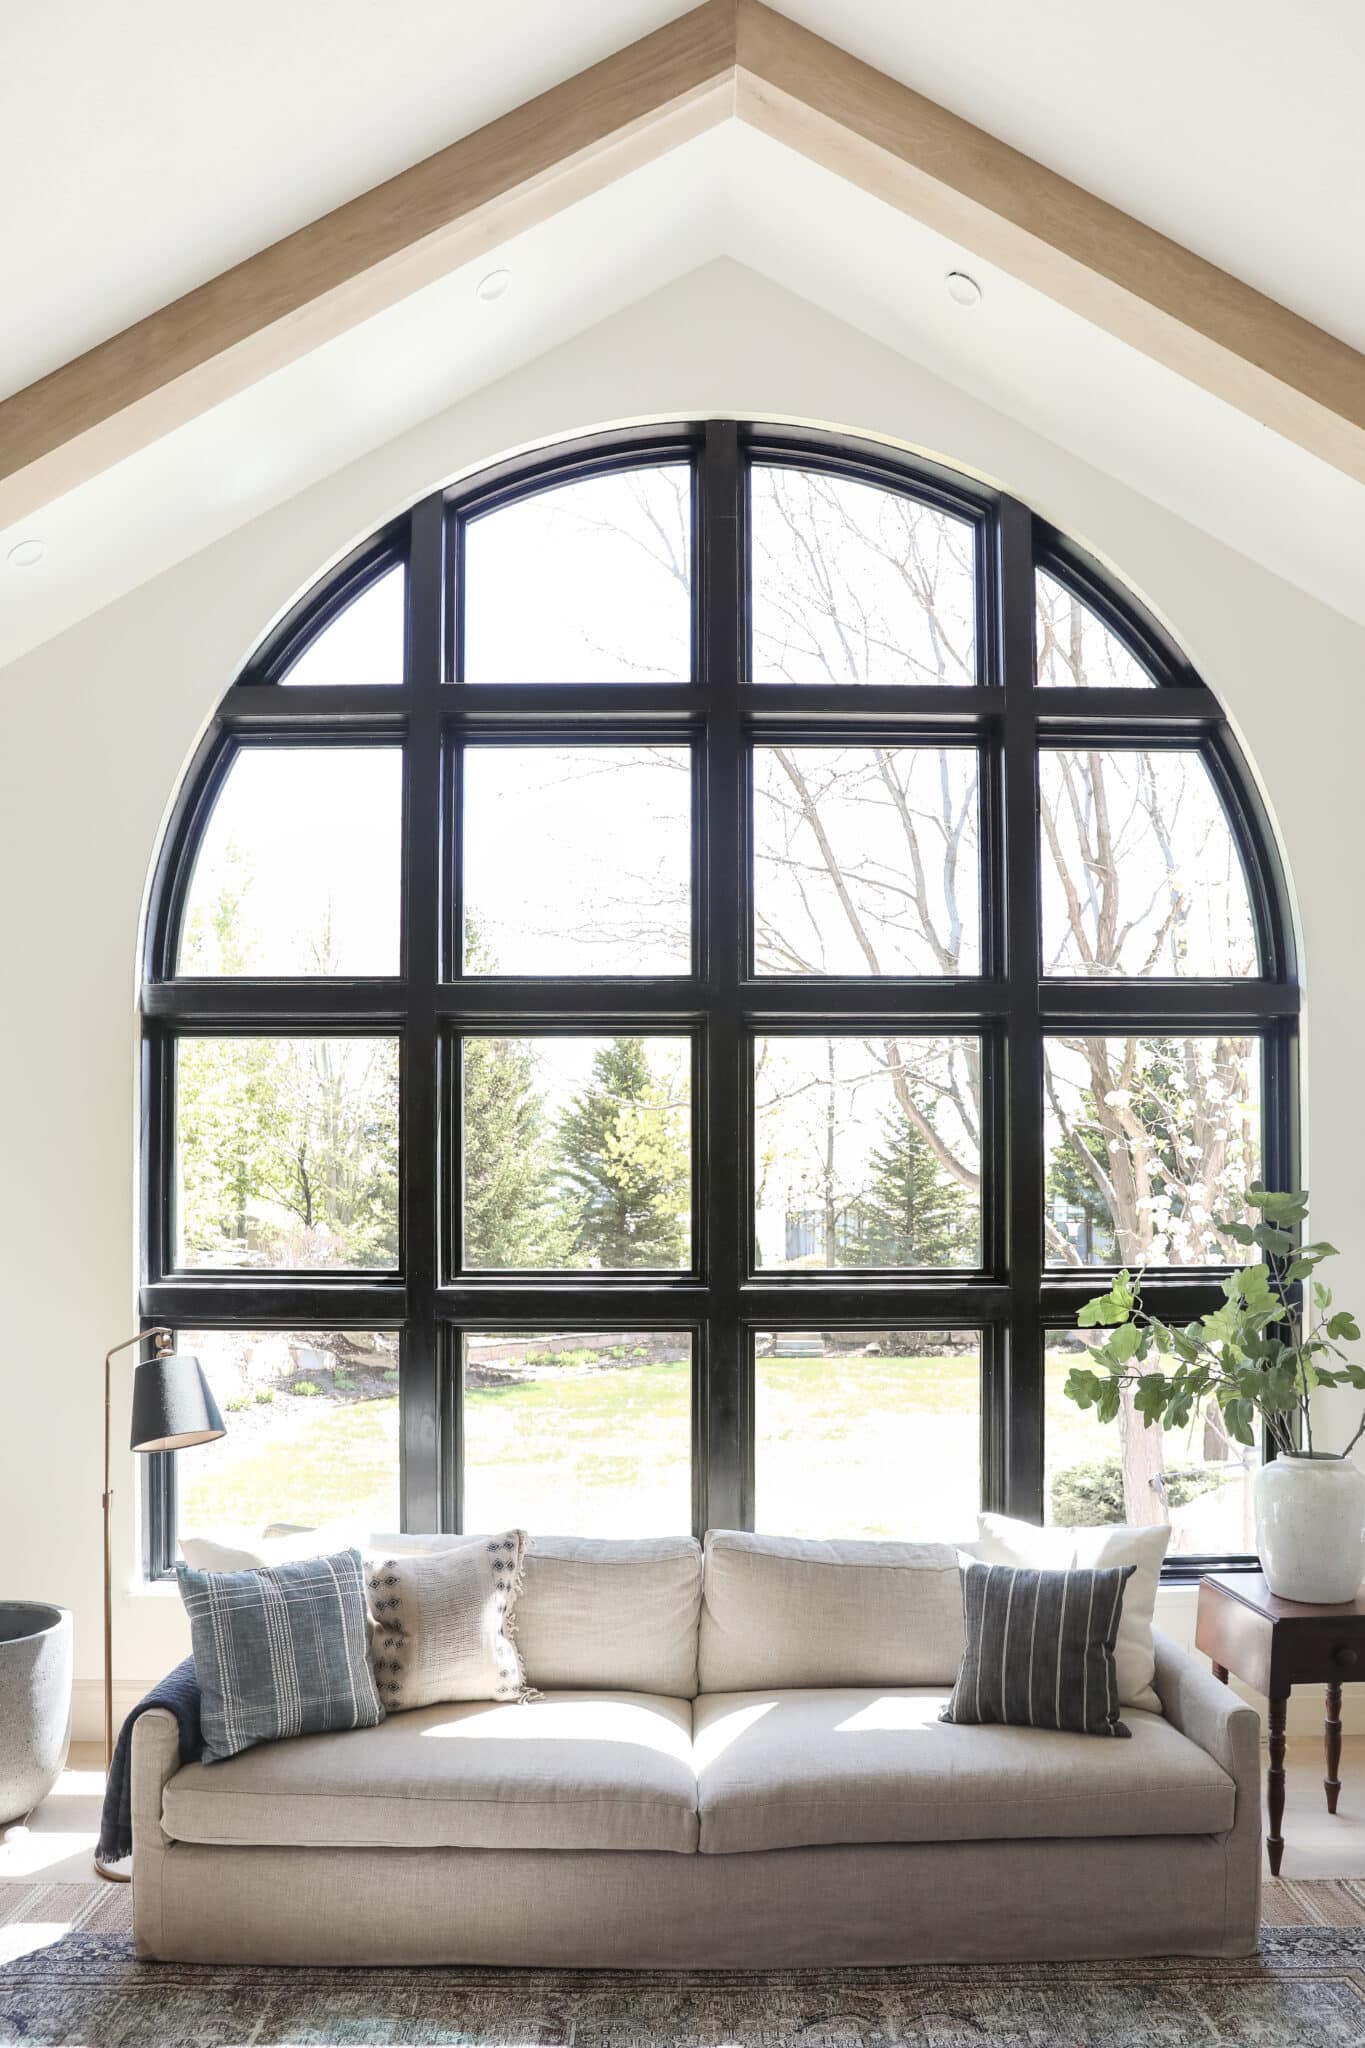 Chris Loves Julia | 8 Things to Consider When Replacing Windows